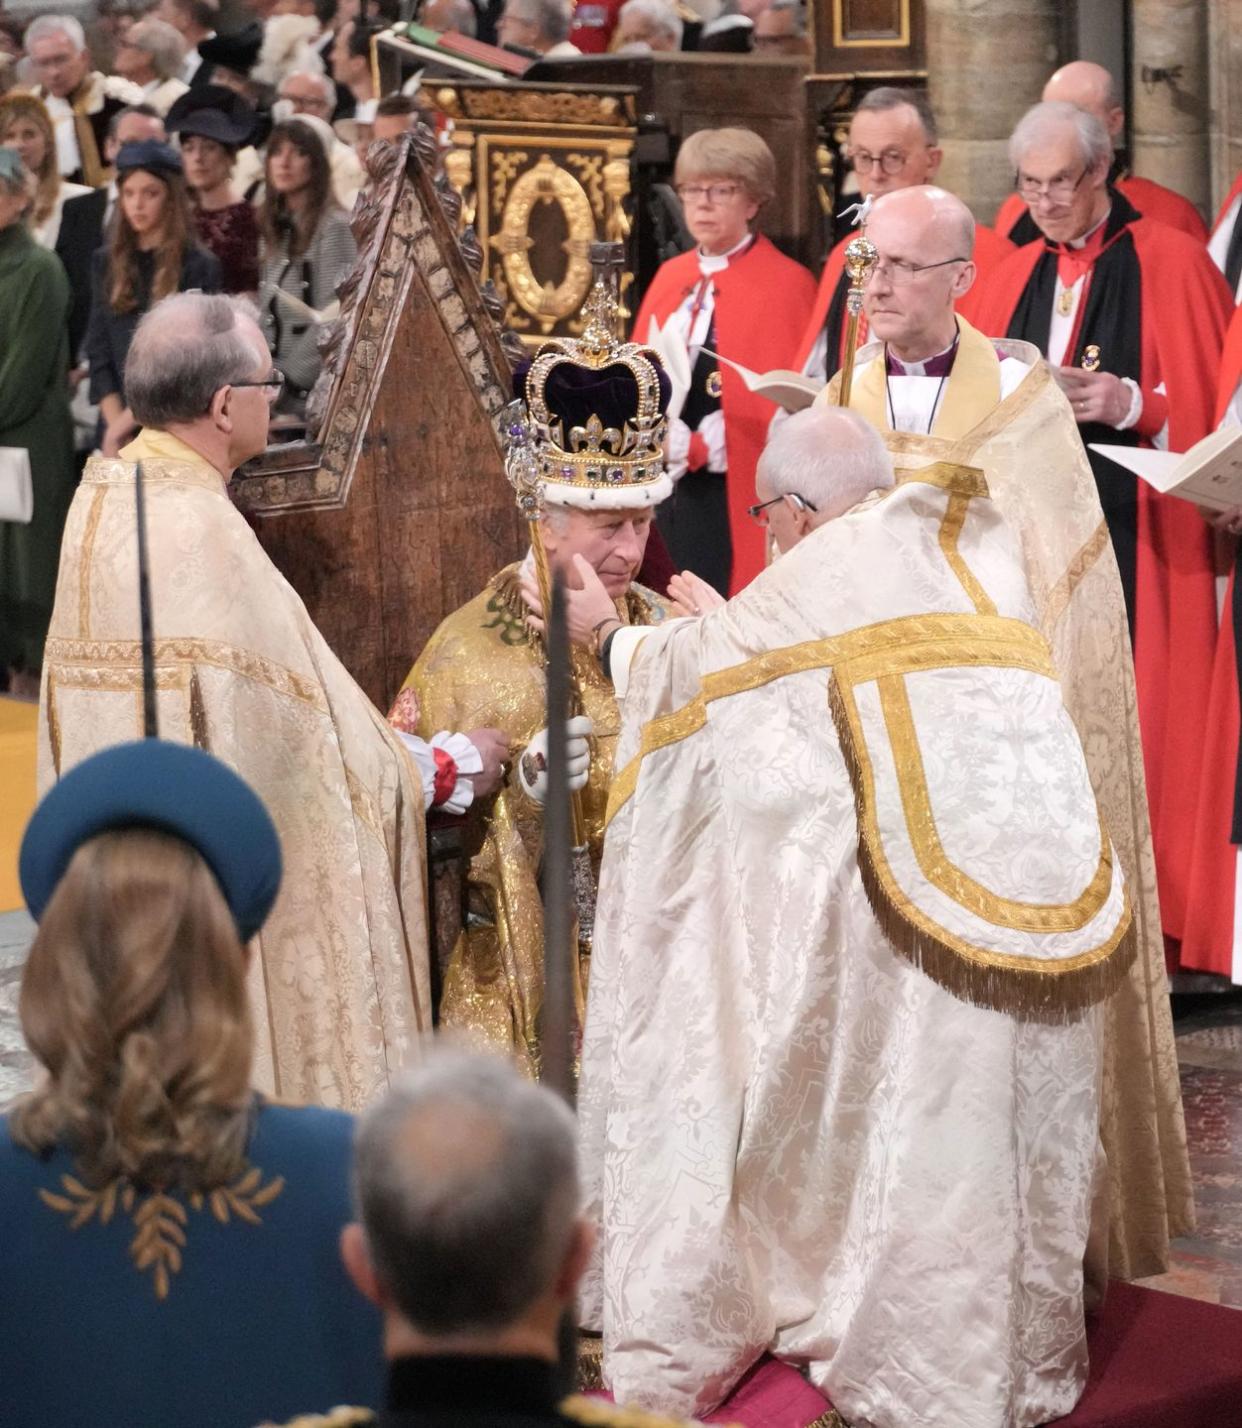 the archbishop of canterbury justin welby places the st edwards crown onto the head of britains king charles iii during the coronation ceremony inside westminster abbey in central london on may 6, 2023 the set piece coronation is the first in britain in 70 years, and only the second in history to be televised charles will be the 40th reigning monarch to be crowned at the central london church since king william i in 1066 outside the uk, he is also king of 14 other commonwealth countries, including australia, canada and new zealand camilla, his second wife, will be crowned queen alongside him and be known as queen camilla after the ceremony photo by jonathan brady pool afp photo by jonathan bradypoolafp via getty images